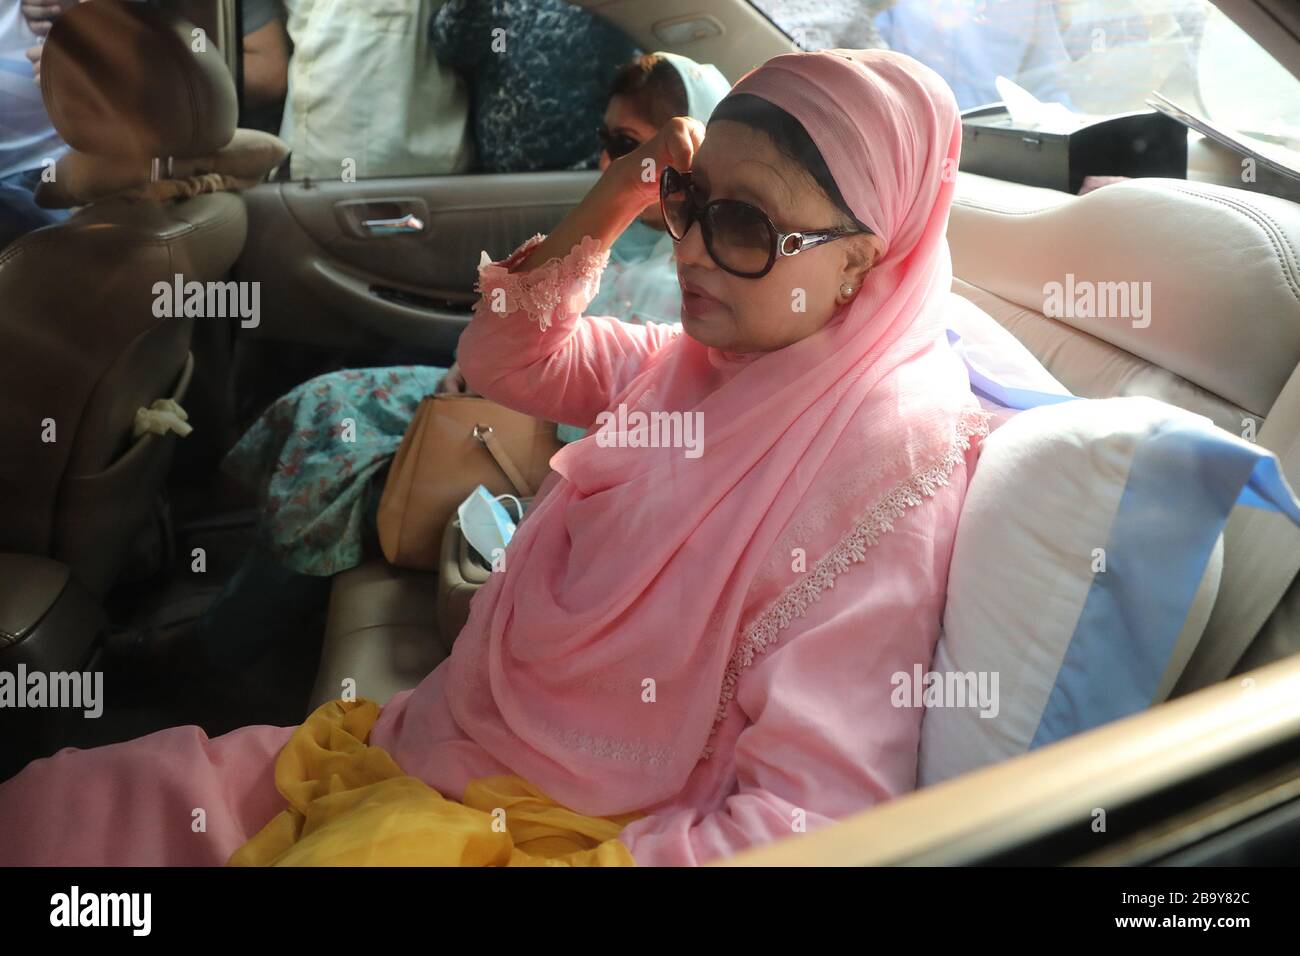 (200325) -- DHAKA, March 25, 2020 (Xinhua) -- Bangladeshi ex-Prime Minister Khaleda Zia leaves the Bangabandhu Sheikh Mujib Medical University (BSMMU) in Dhaka, Bangladesh, March 25, 2020. Khaleda Zia has been released from jail for six months on humanitarian grounds in light of the COVID-19 outbreak in the country. Zia, also chairperson of Bangladesh Nationalist Party (BNP), at around 4:15 p.m. local time on Wednesday, came out of Bangabandhu Sheikh Mujib Medical University (BSMMU) in capital Dhaka, where she was being treated. In April 2018, Zia was shifted to the BSMMU when she fell Stock Photo